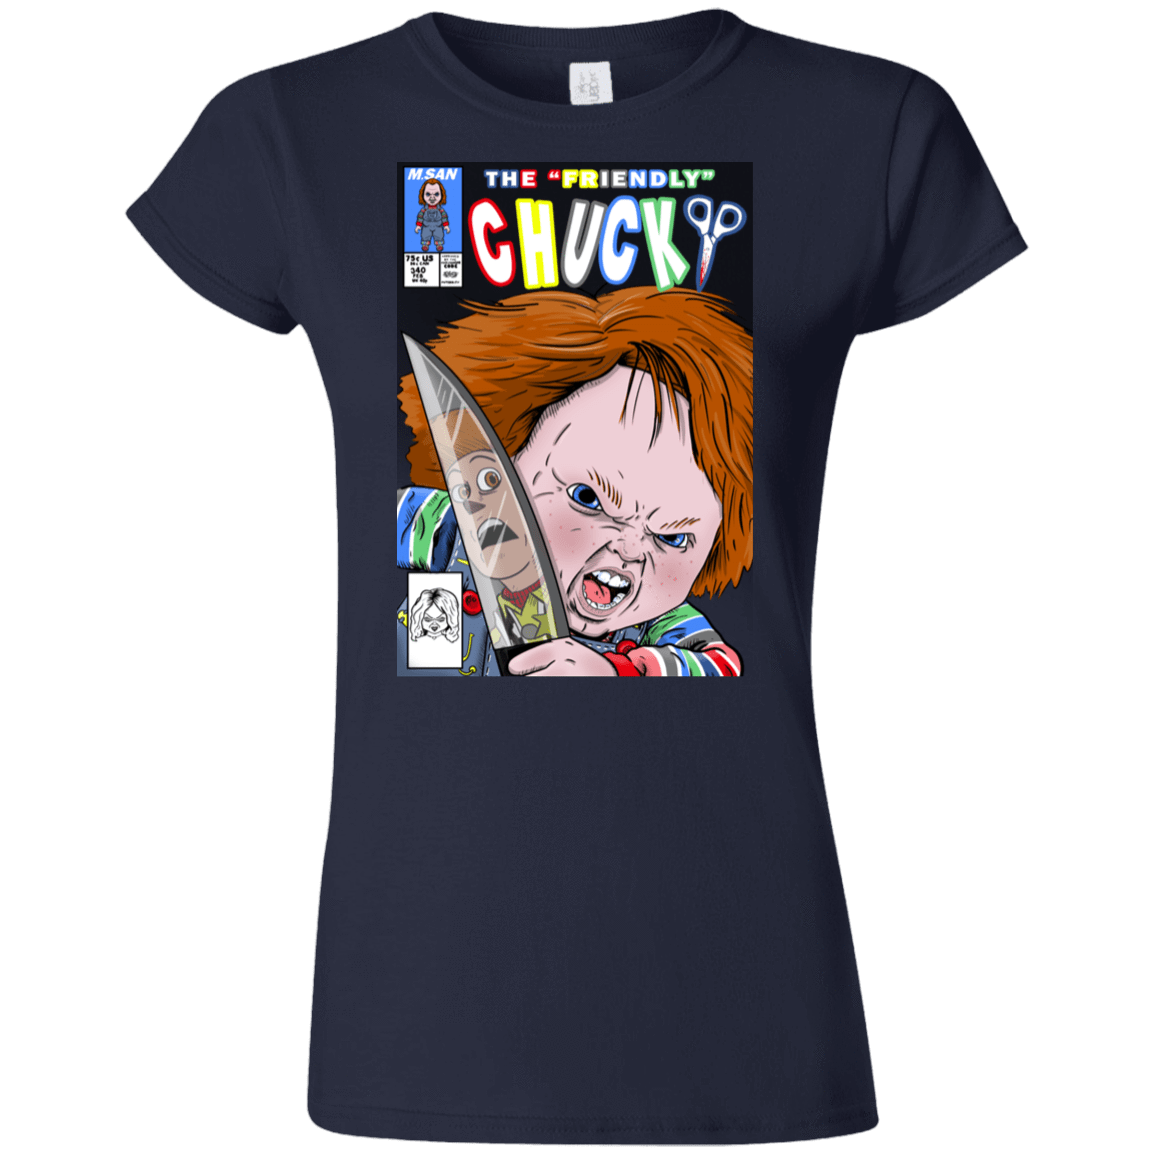 T-Shirts Navy / S The Friendly Chucky Junior Slimmer-Fit T-Shirt